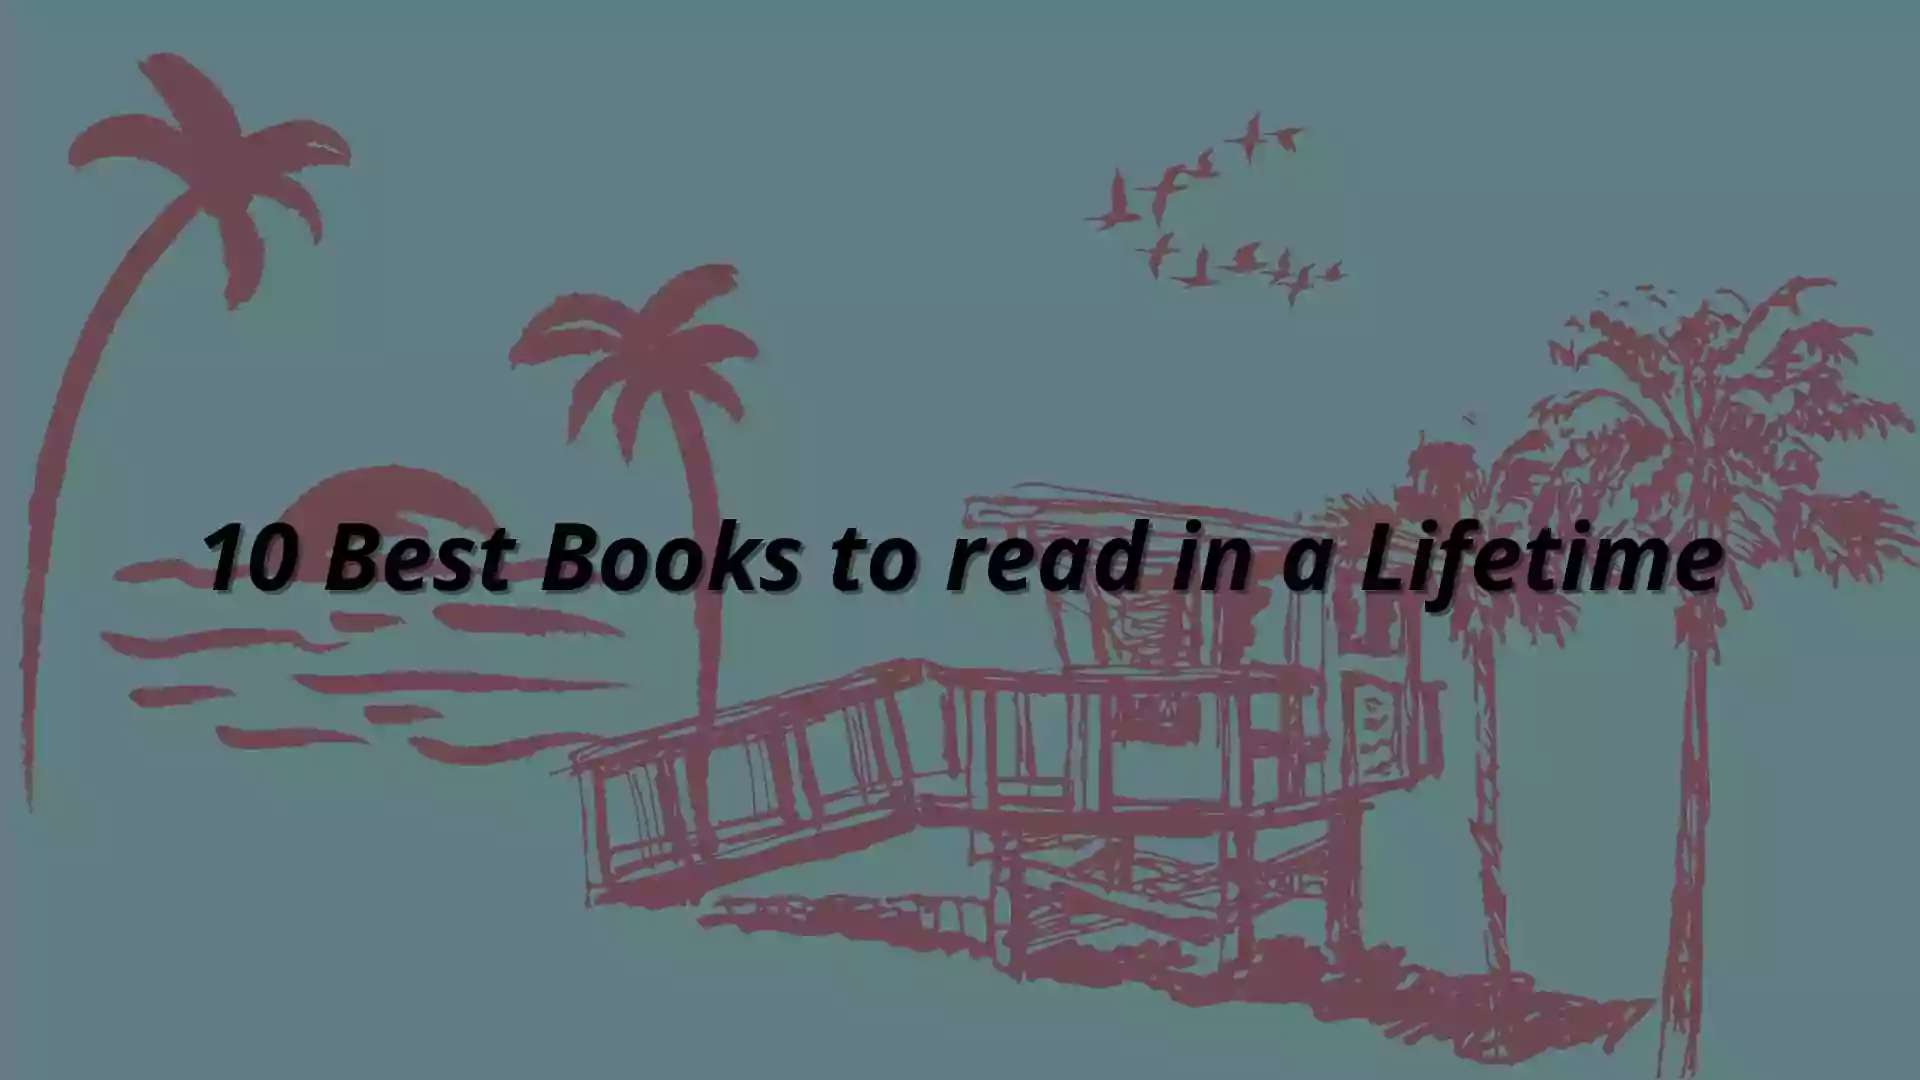 10 Best Books to read in a Lifetime